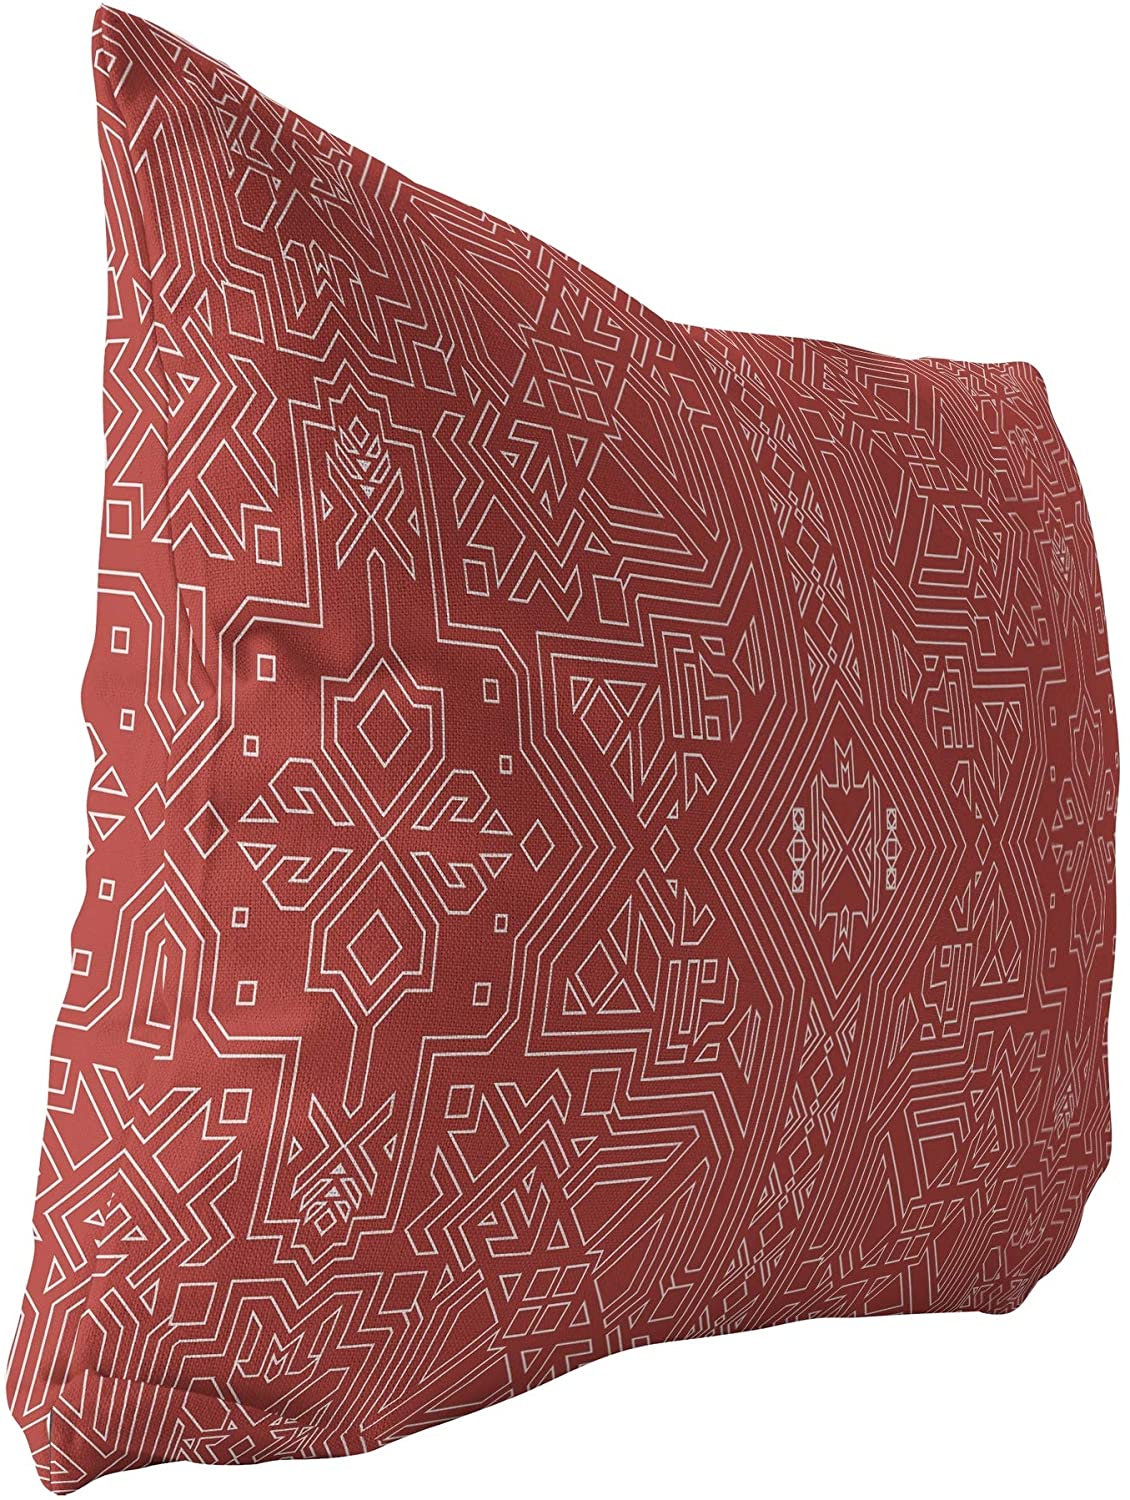 MISC Terracotta Indoor|Outdoor Lumbar Pillow by Designs 20x14 Orange Geometric Southwestern Polyester Removable Cover